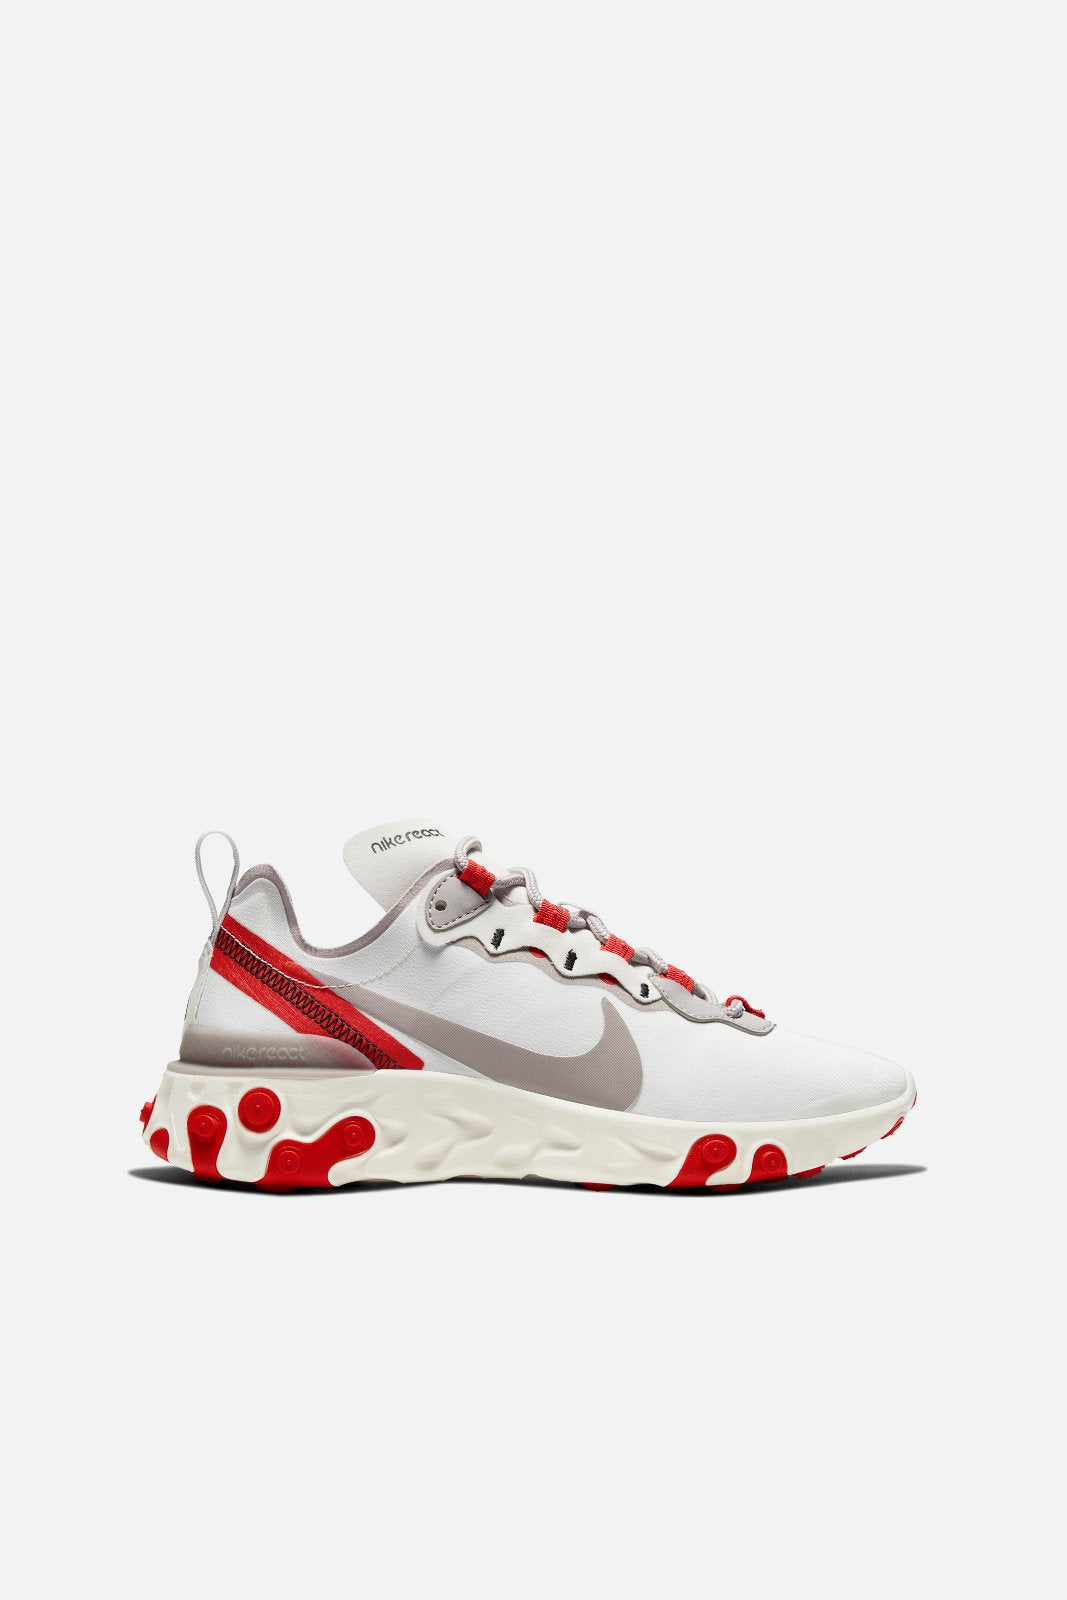 nike react element silver and red